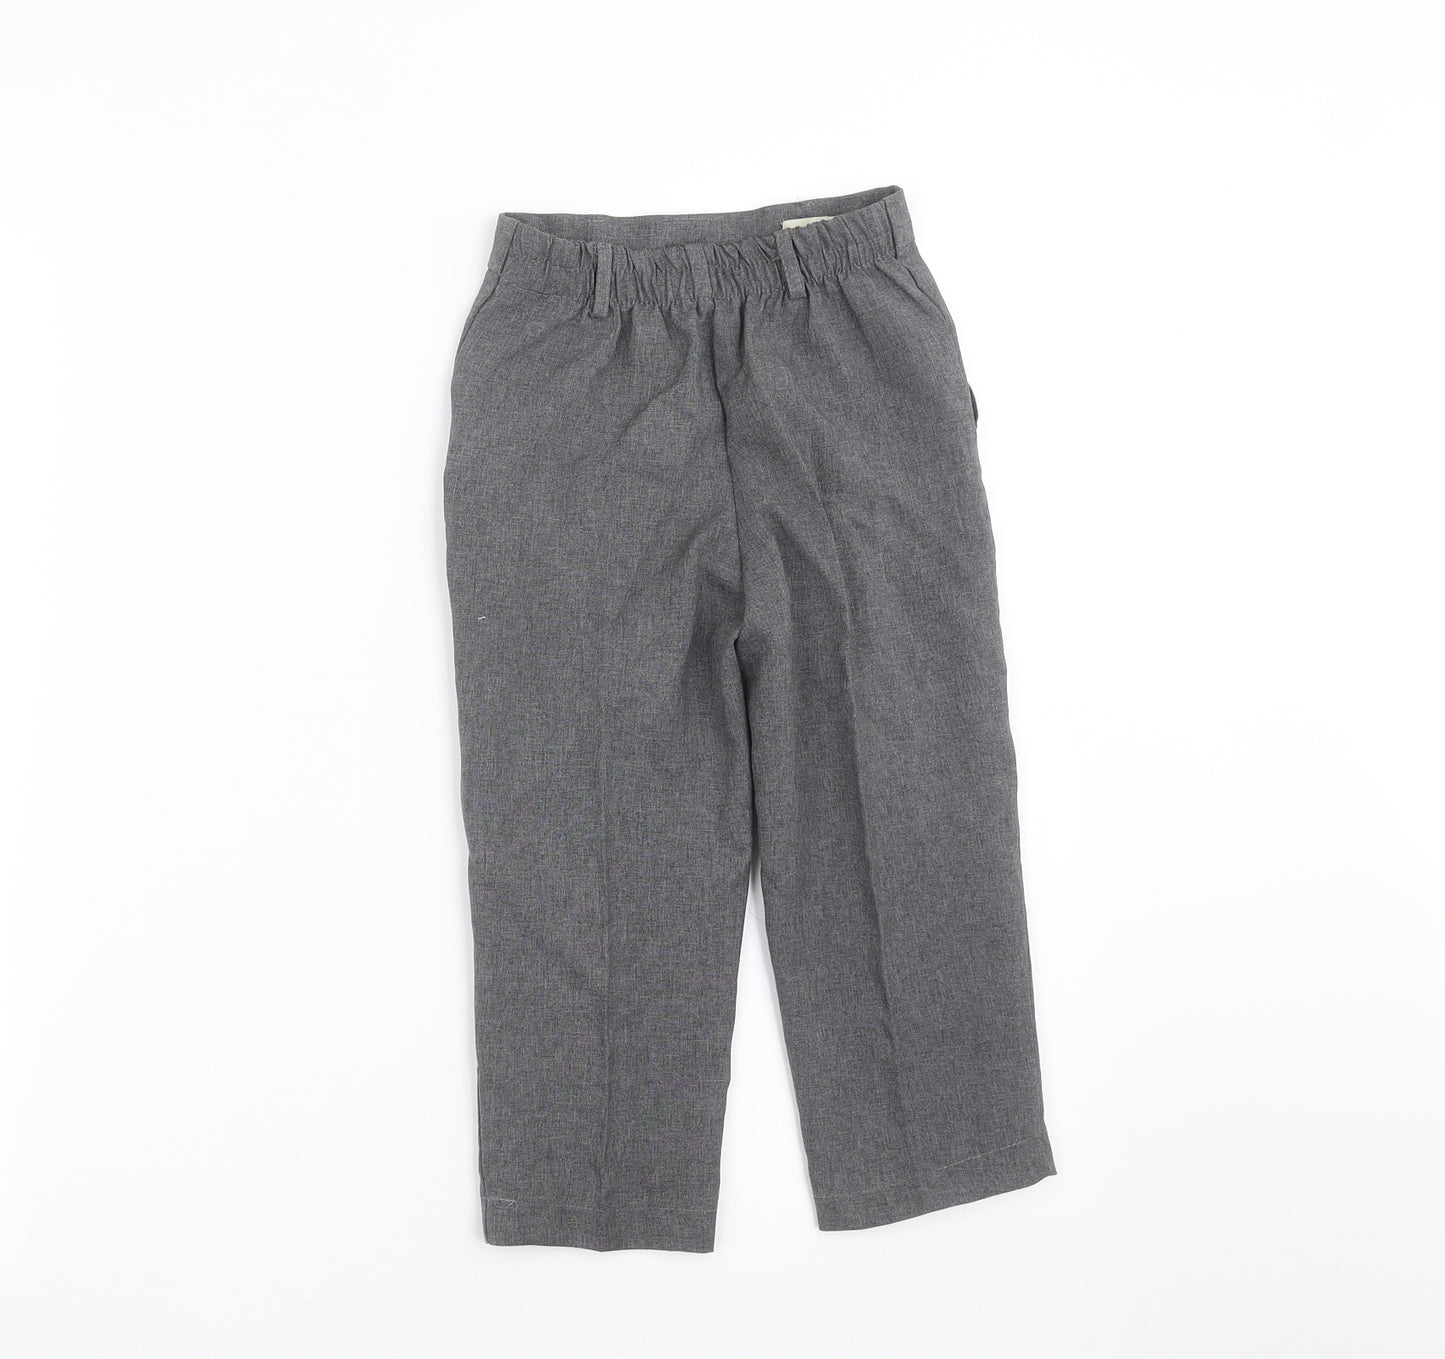 Paisely of London Boys Grey   Dress Pants Trousers Size 3-4 Years